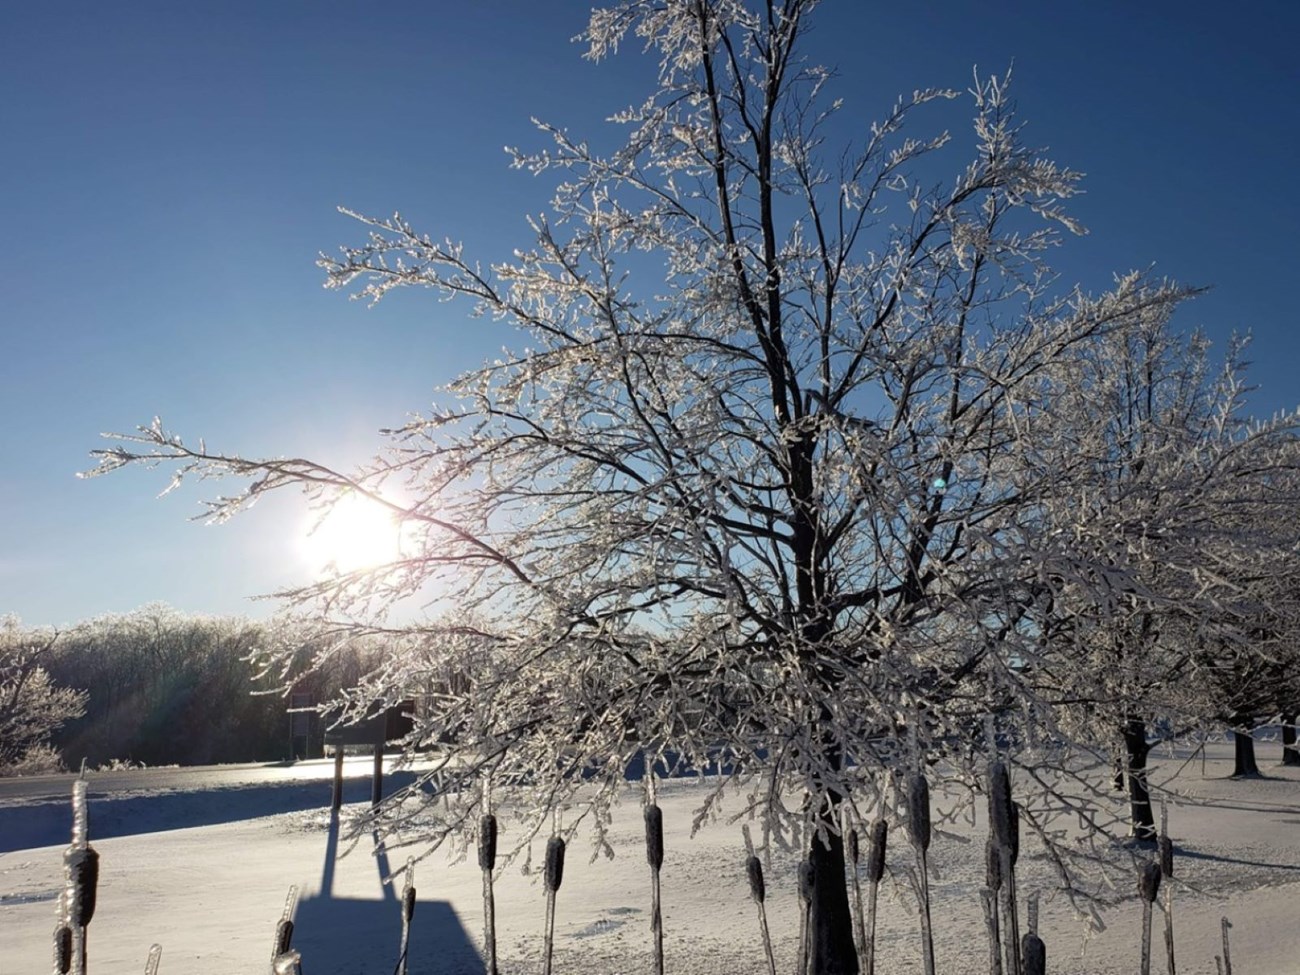 A tree with ice on the branches.